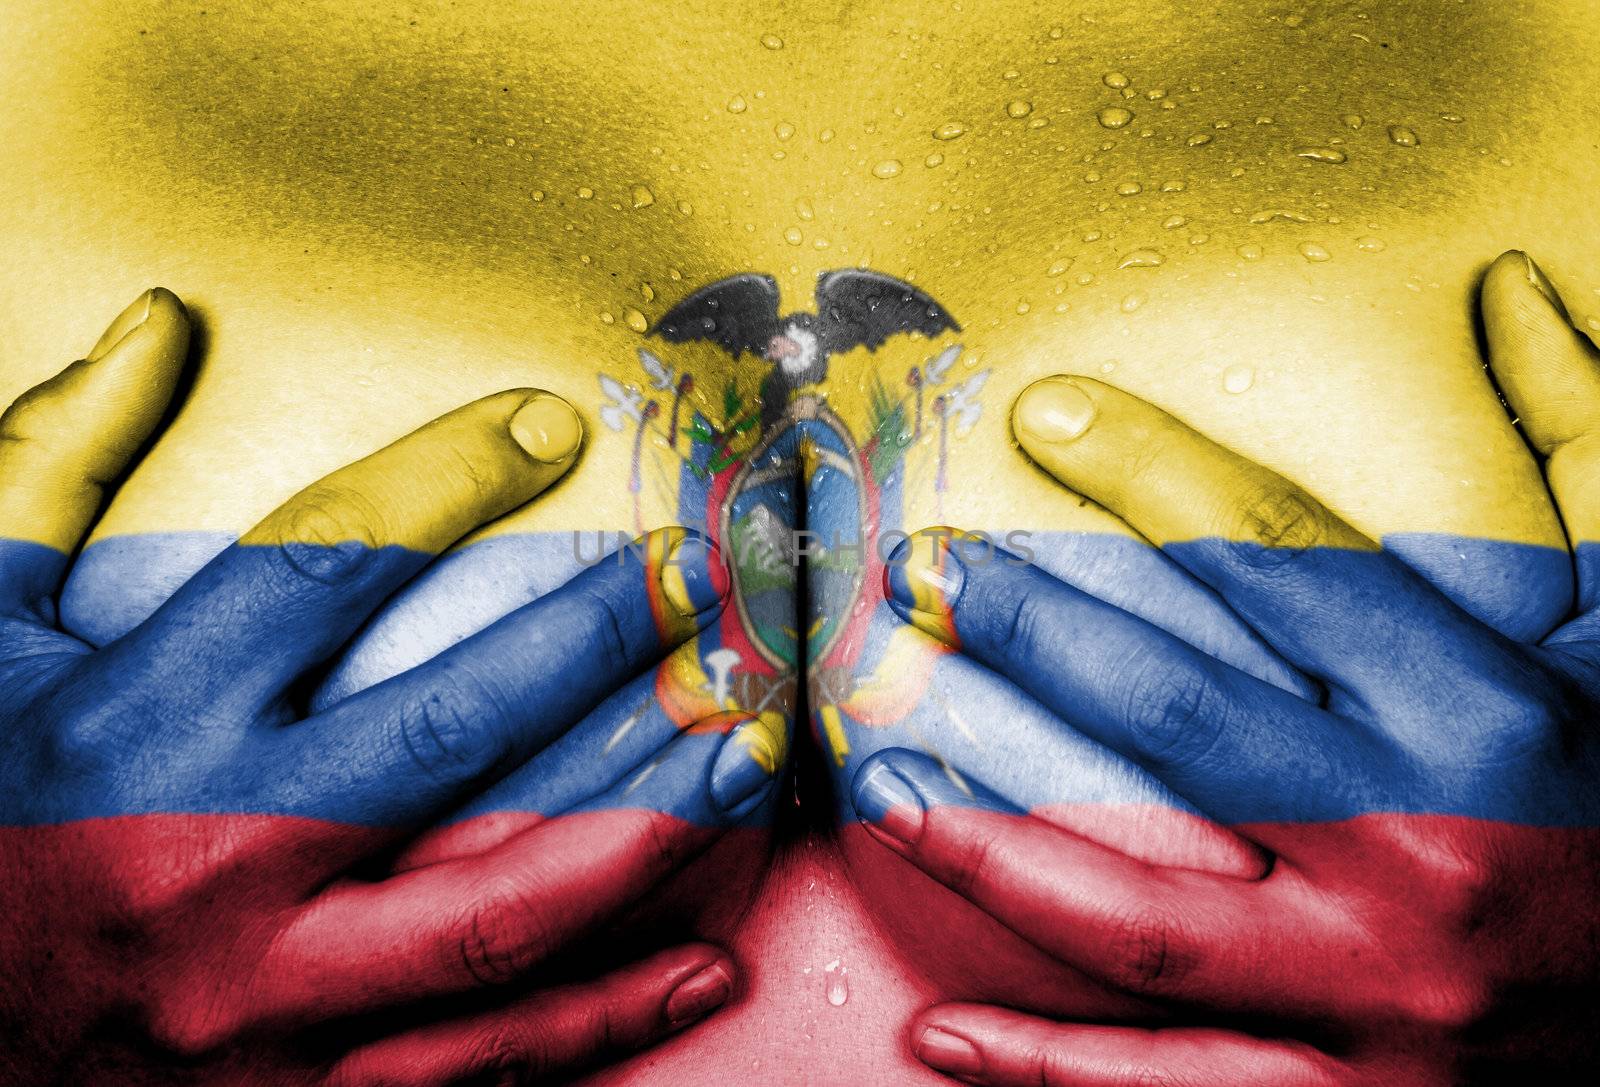 Sweaty upper part of female body, hands covering breasts, flag of Ecuador